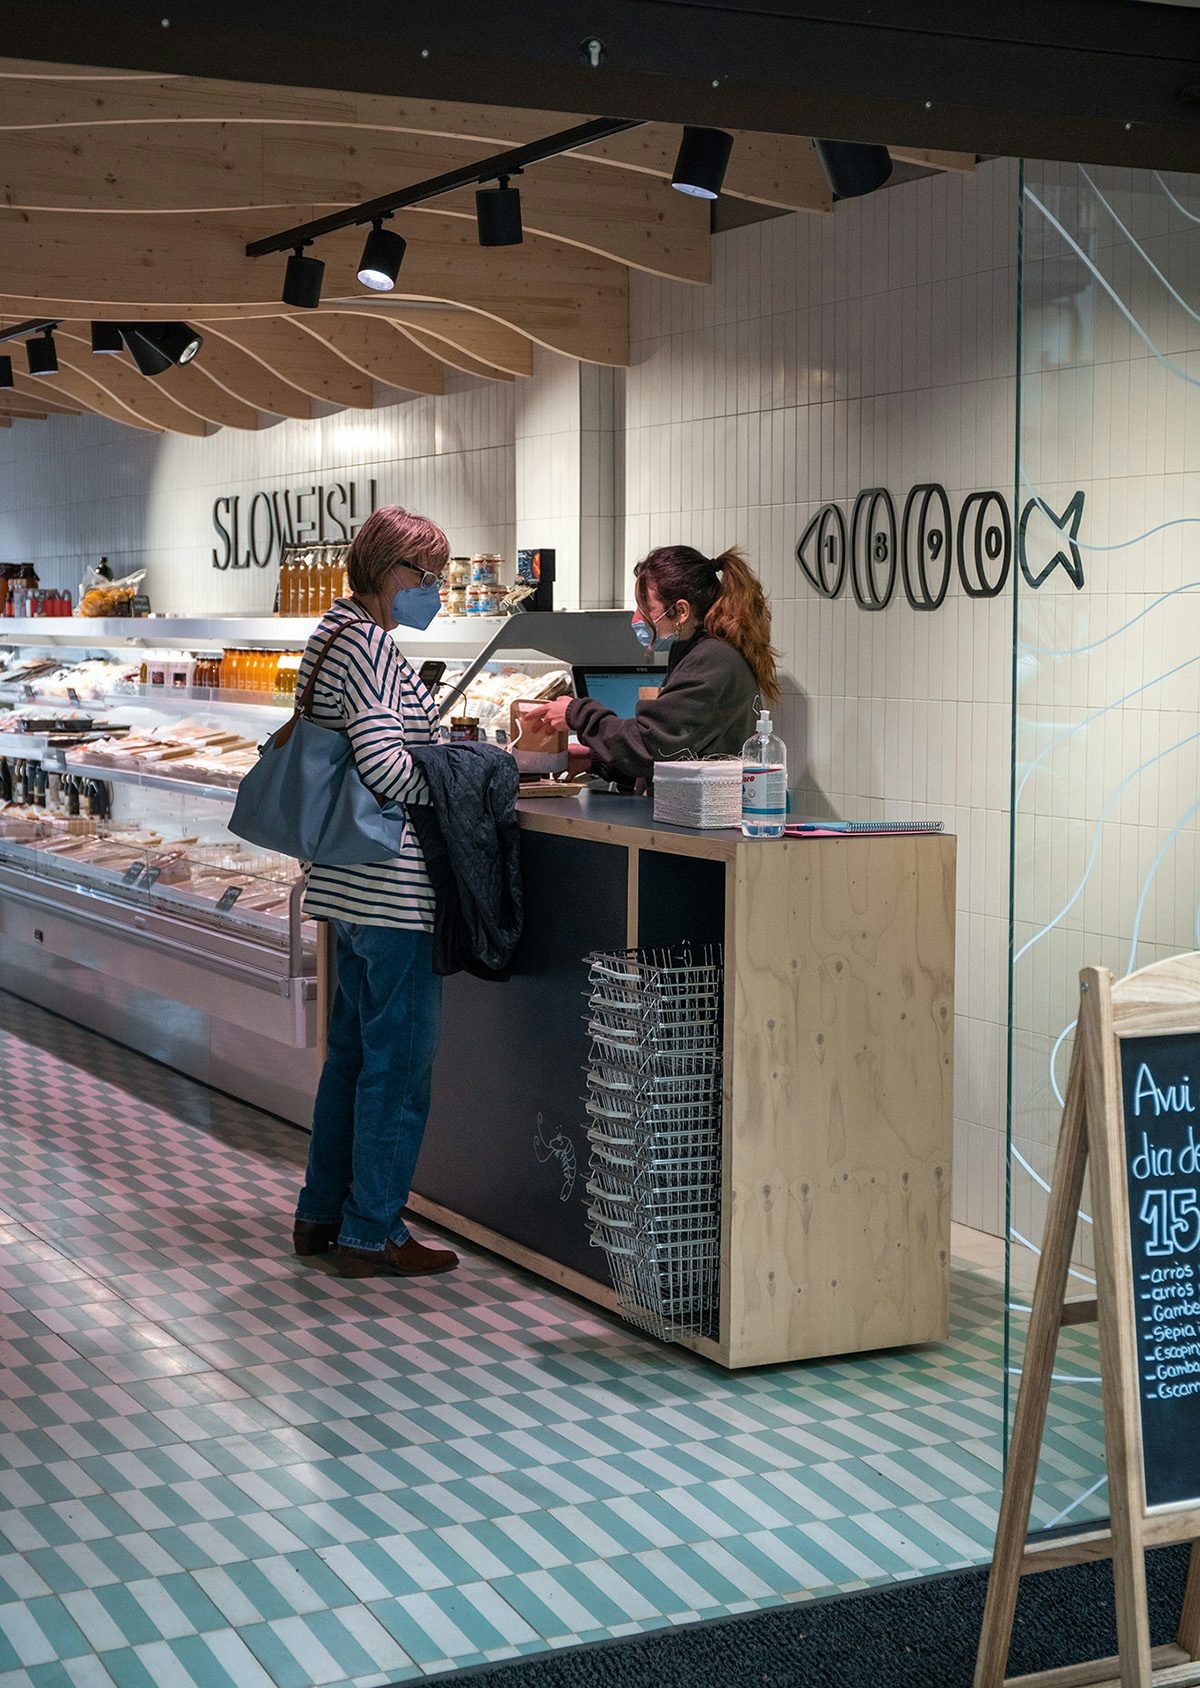 Photograph of a shop counter with signage for Slowfish by Vasava